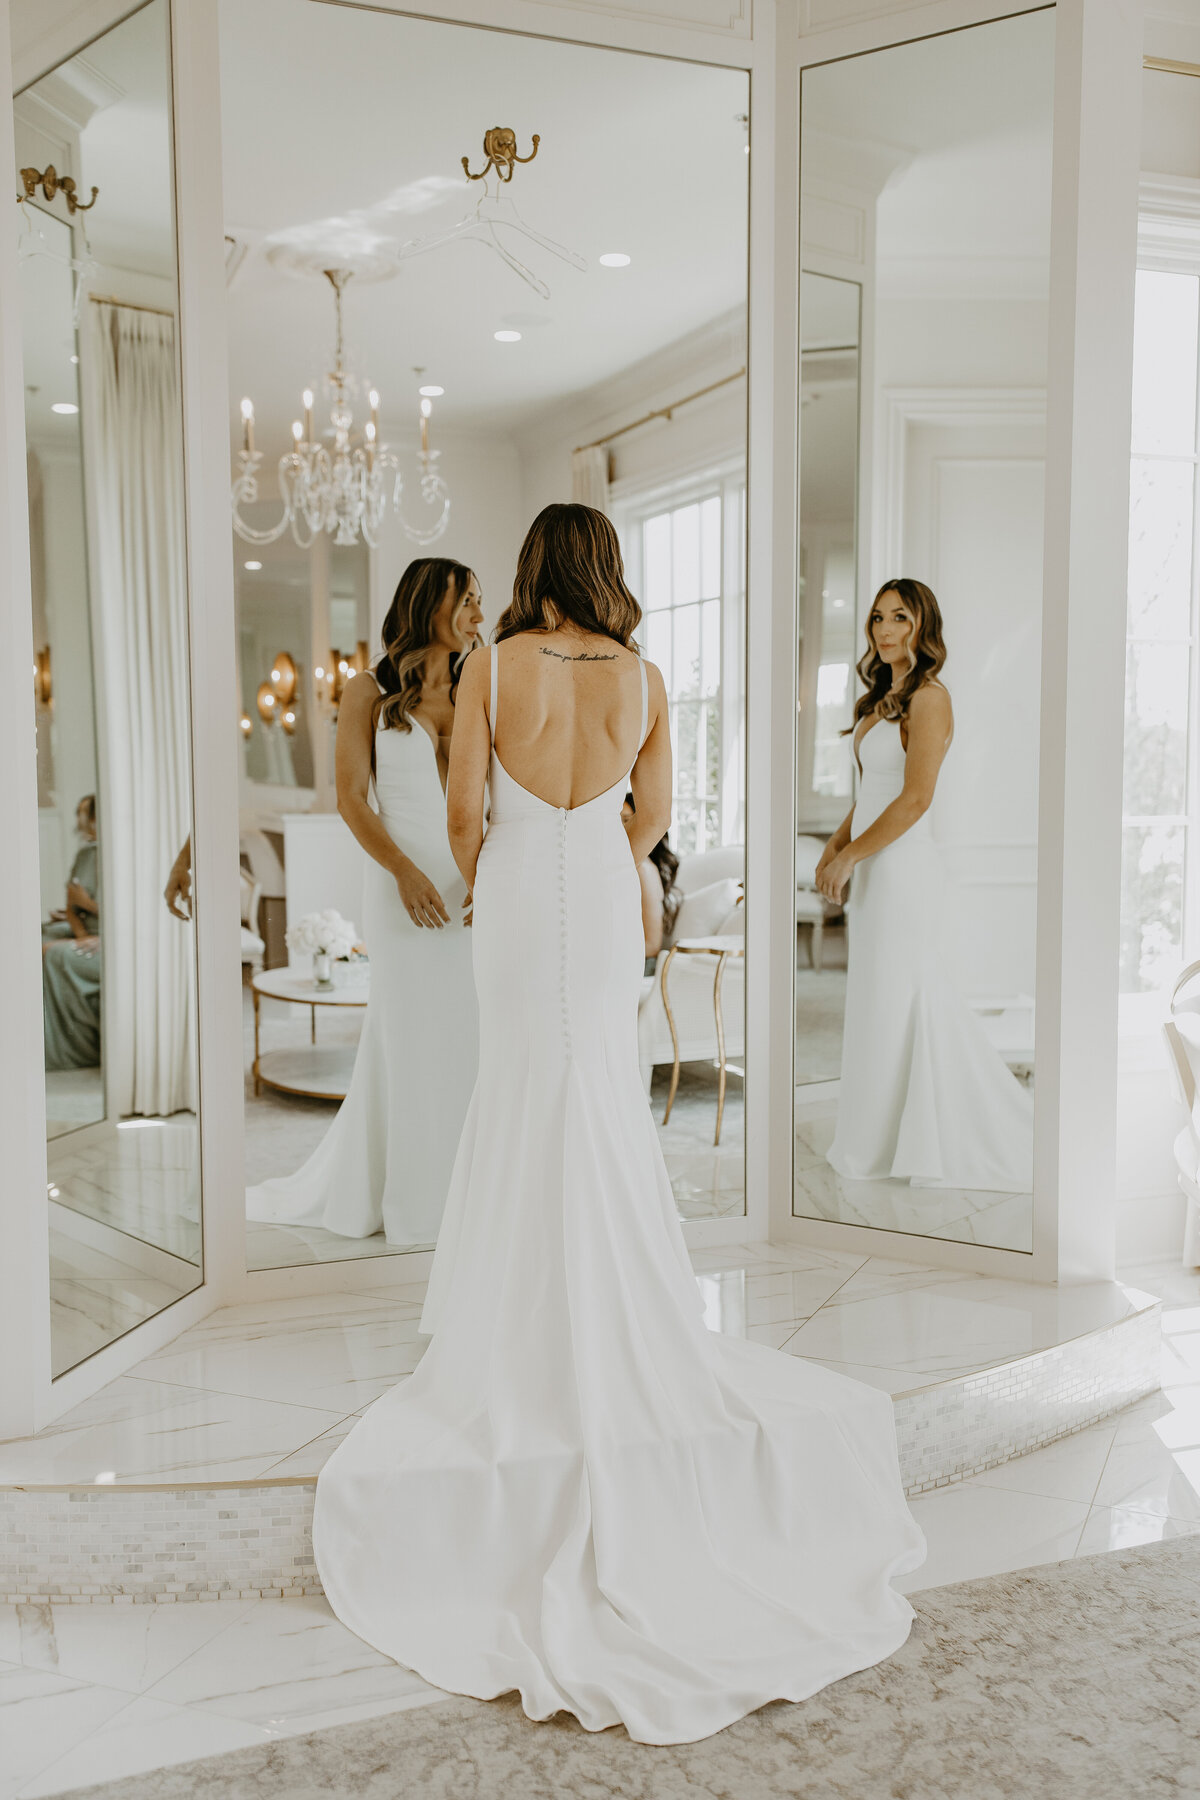 Wedding Photographer & Videographer, bride standing in front of mirror